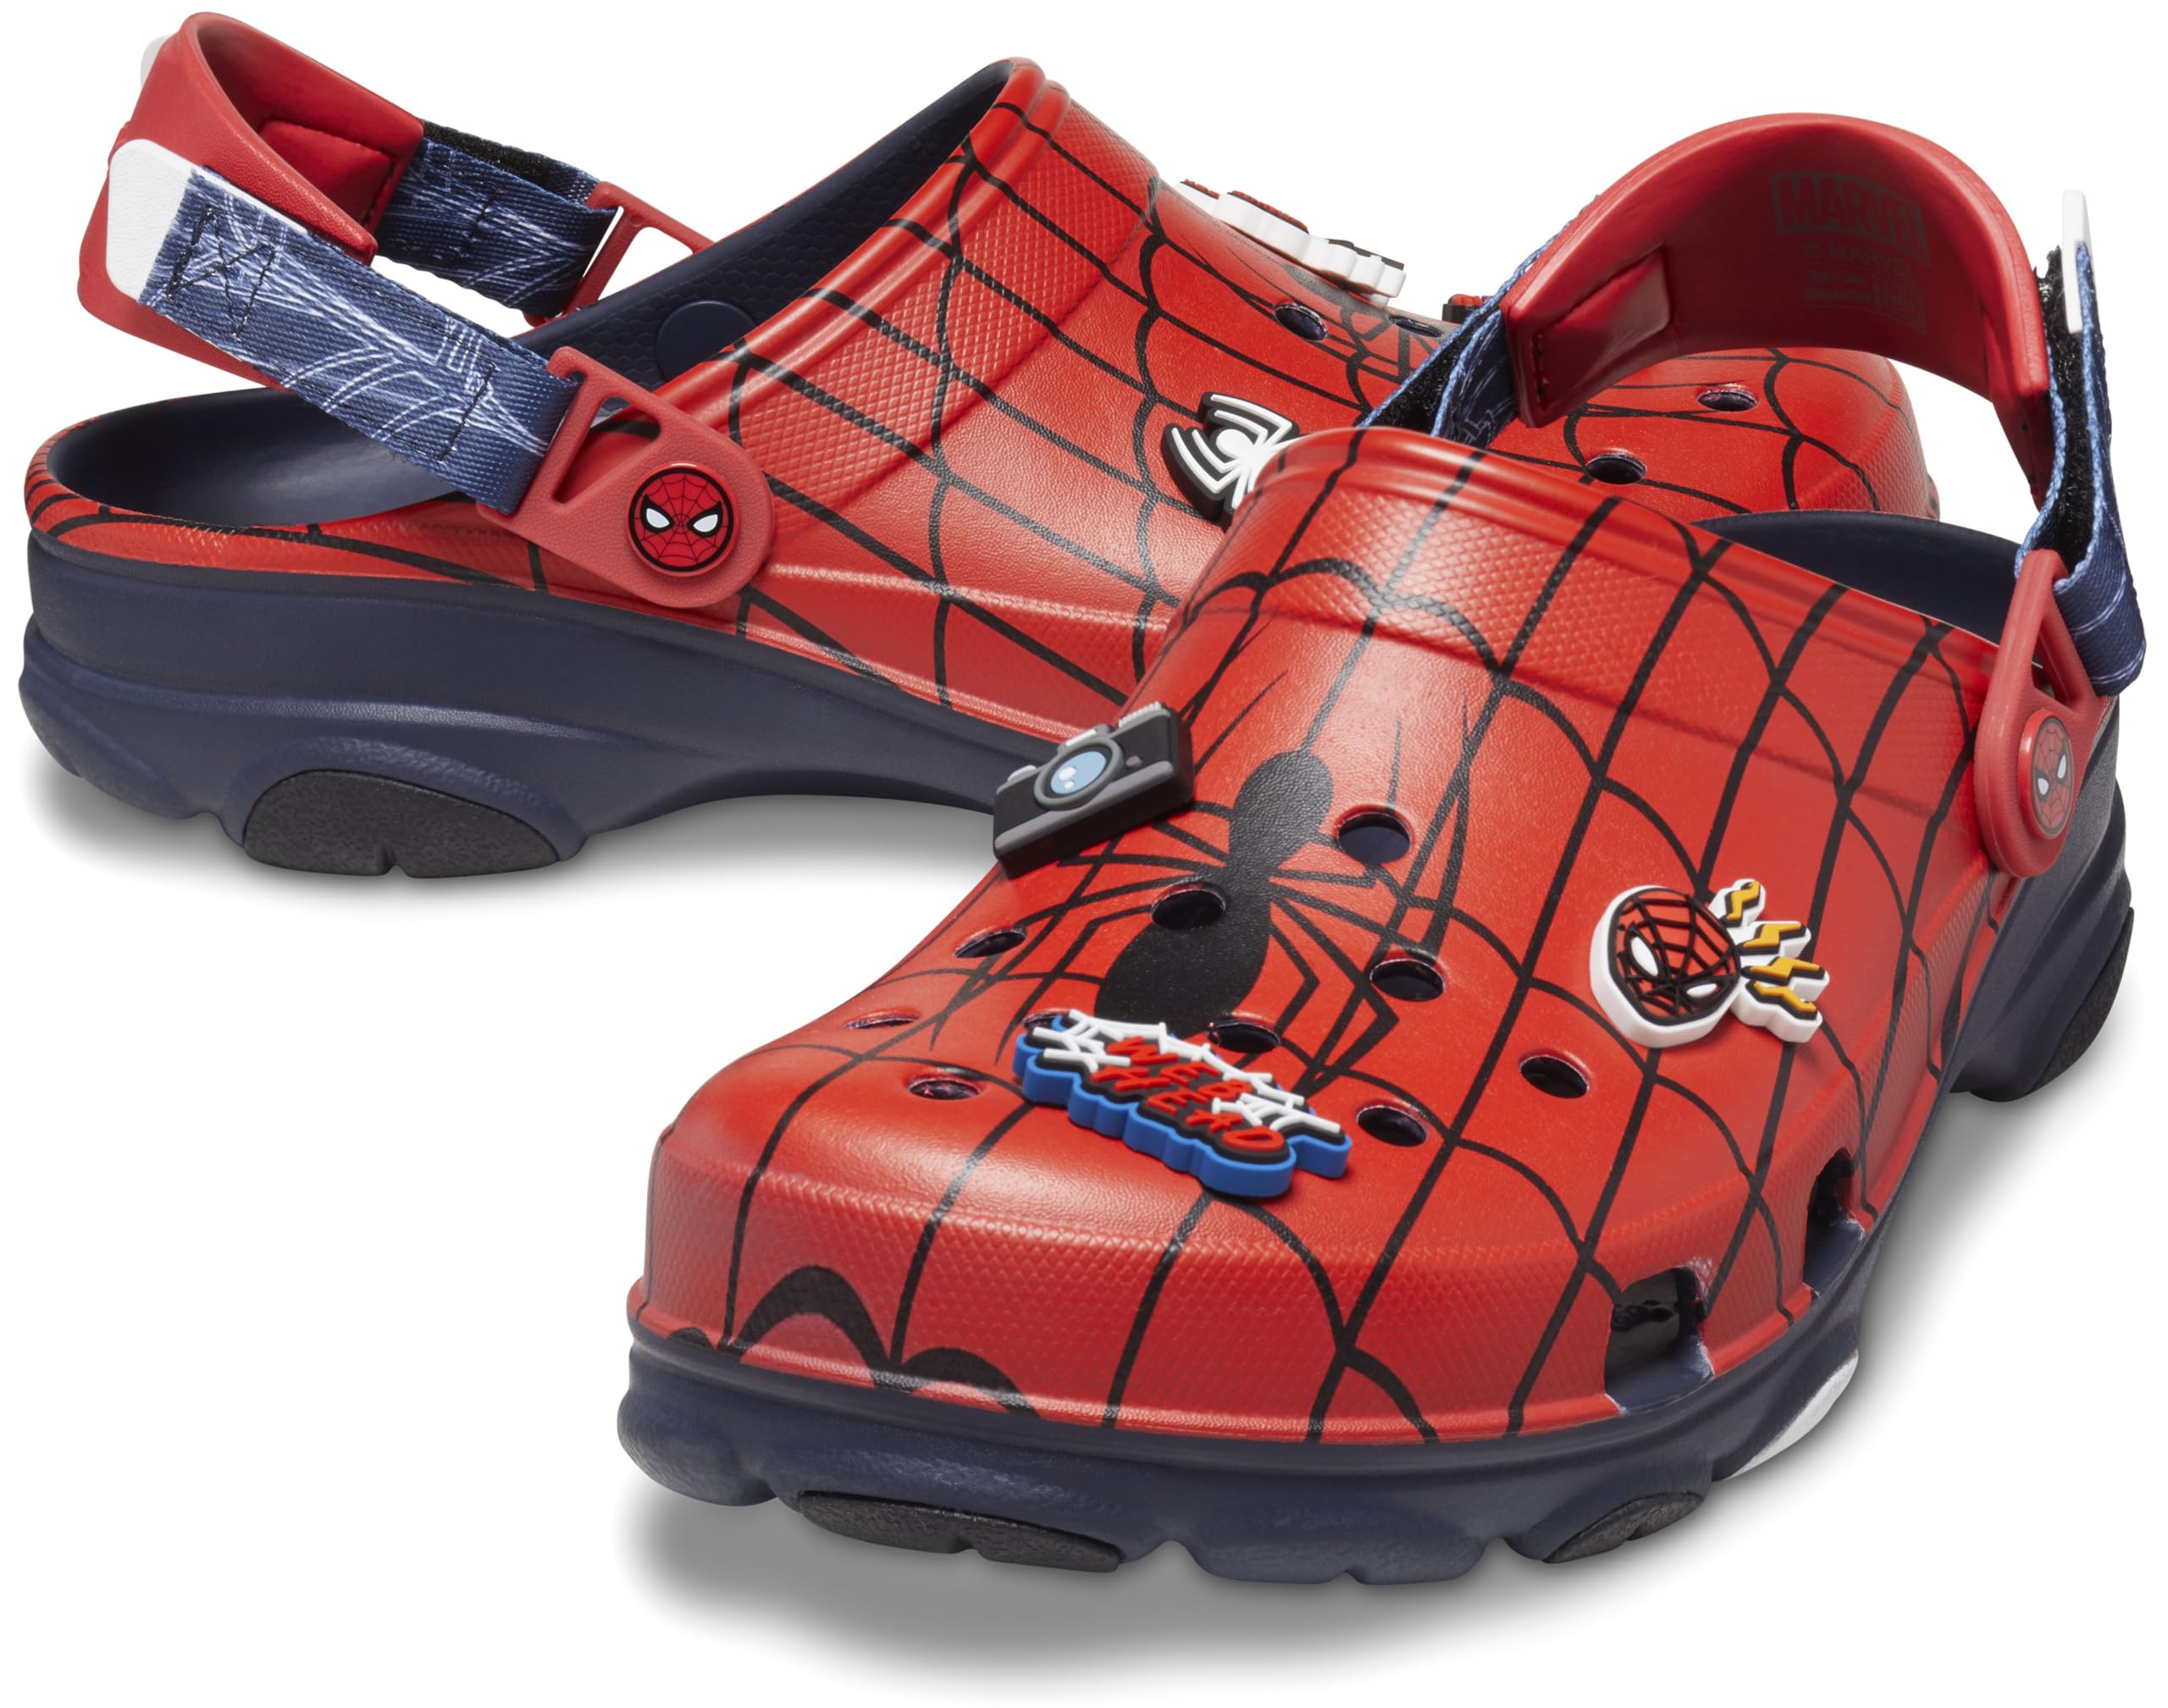 Crocs Unisex-Adult Marvel All Terrain Clogs, Black Panther and Spiderman Shoes